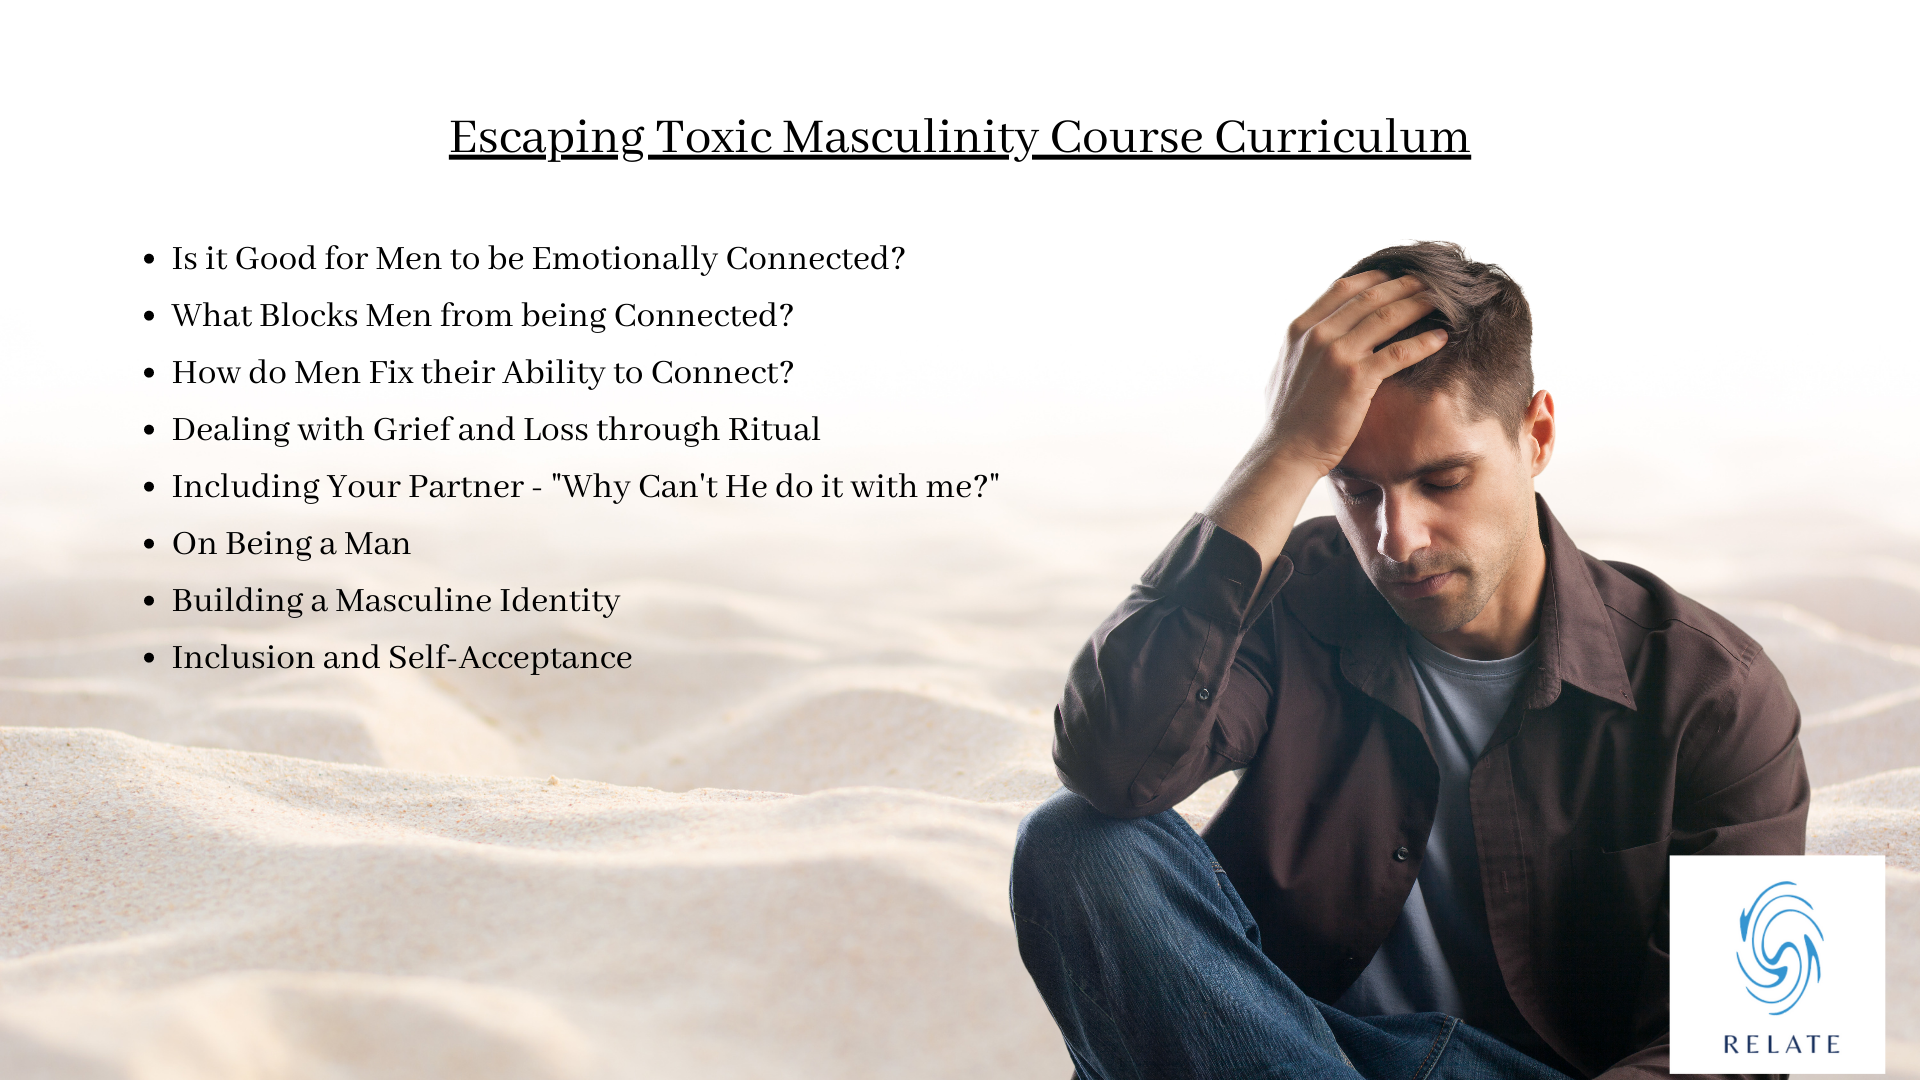 Escaping Toxic Masculinity